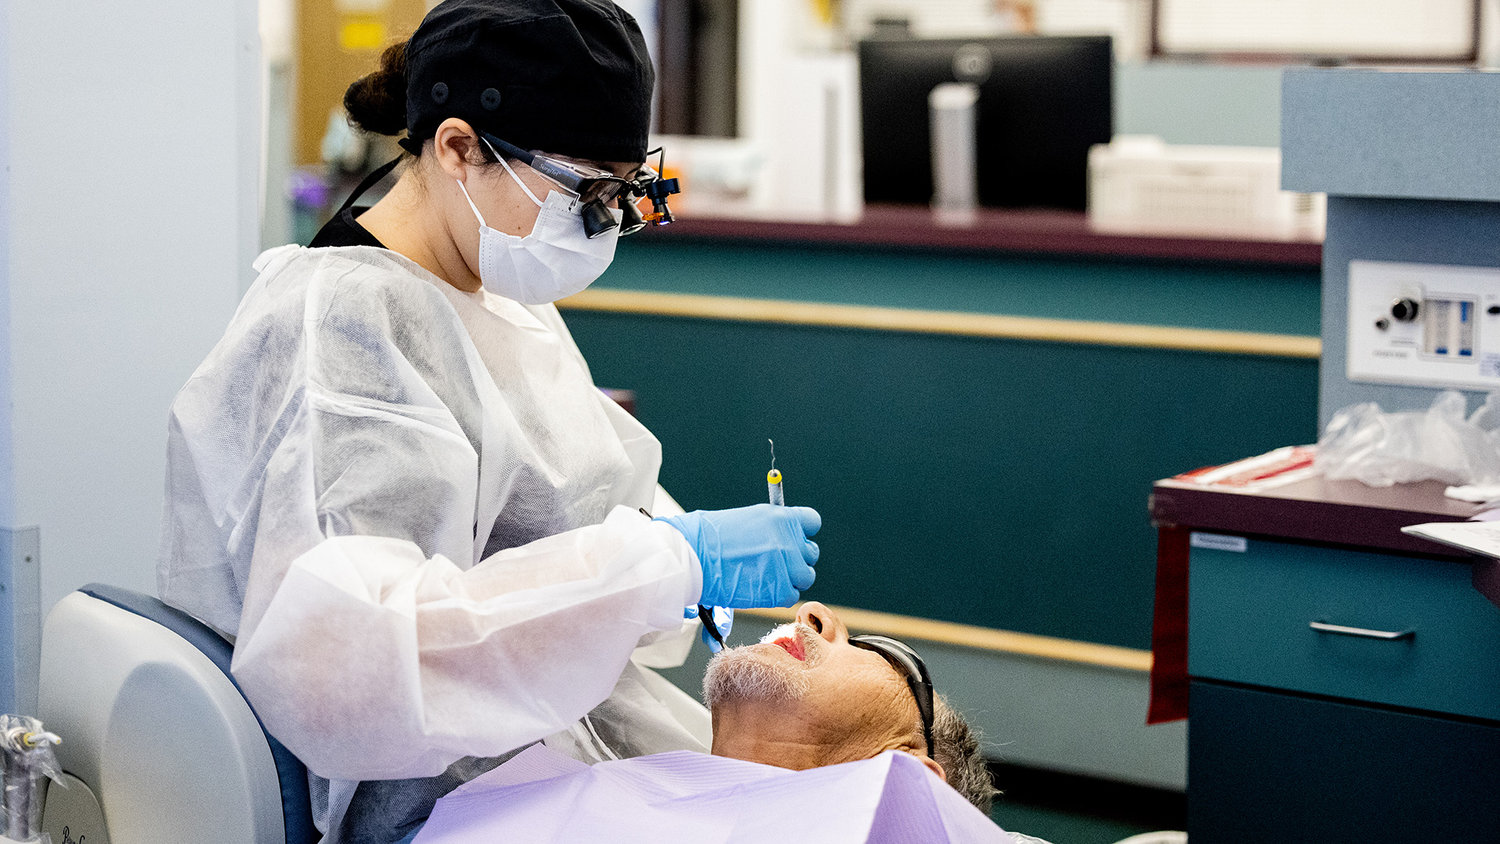 IRSC Dental Hygiene Program- Dental hygienists work with dentists to help patients maintain and improve their oral health and quality of life. They examine the mouth; scale, root plane, clean and polish teeth; and expose and interpret x-rays.